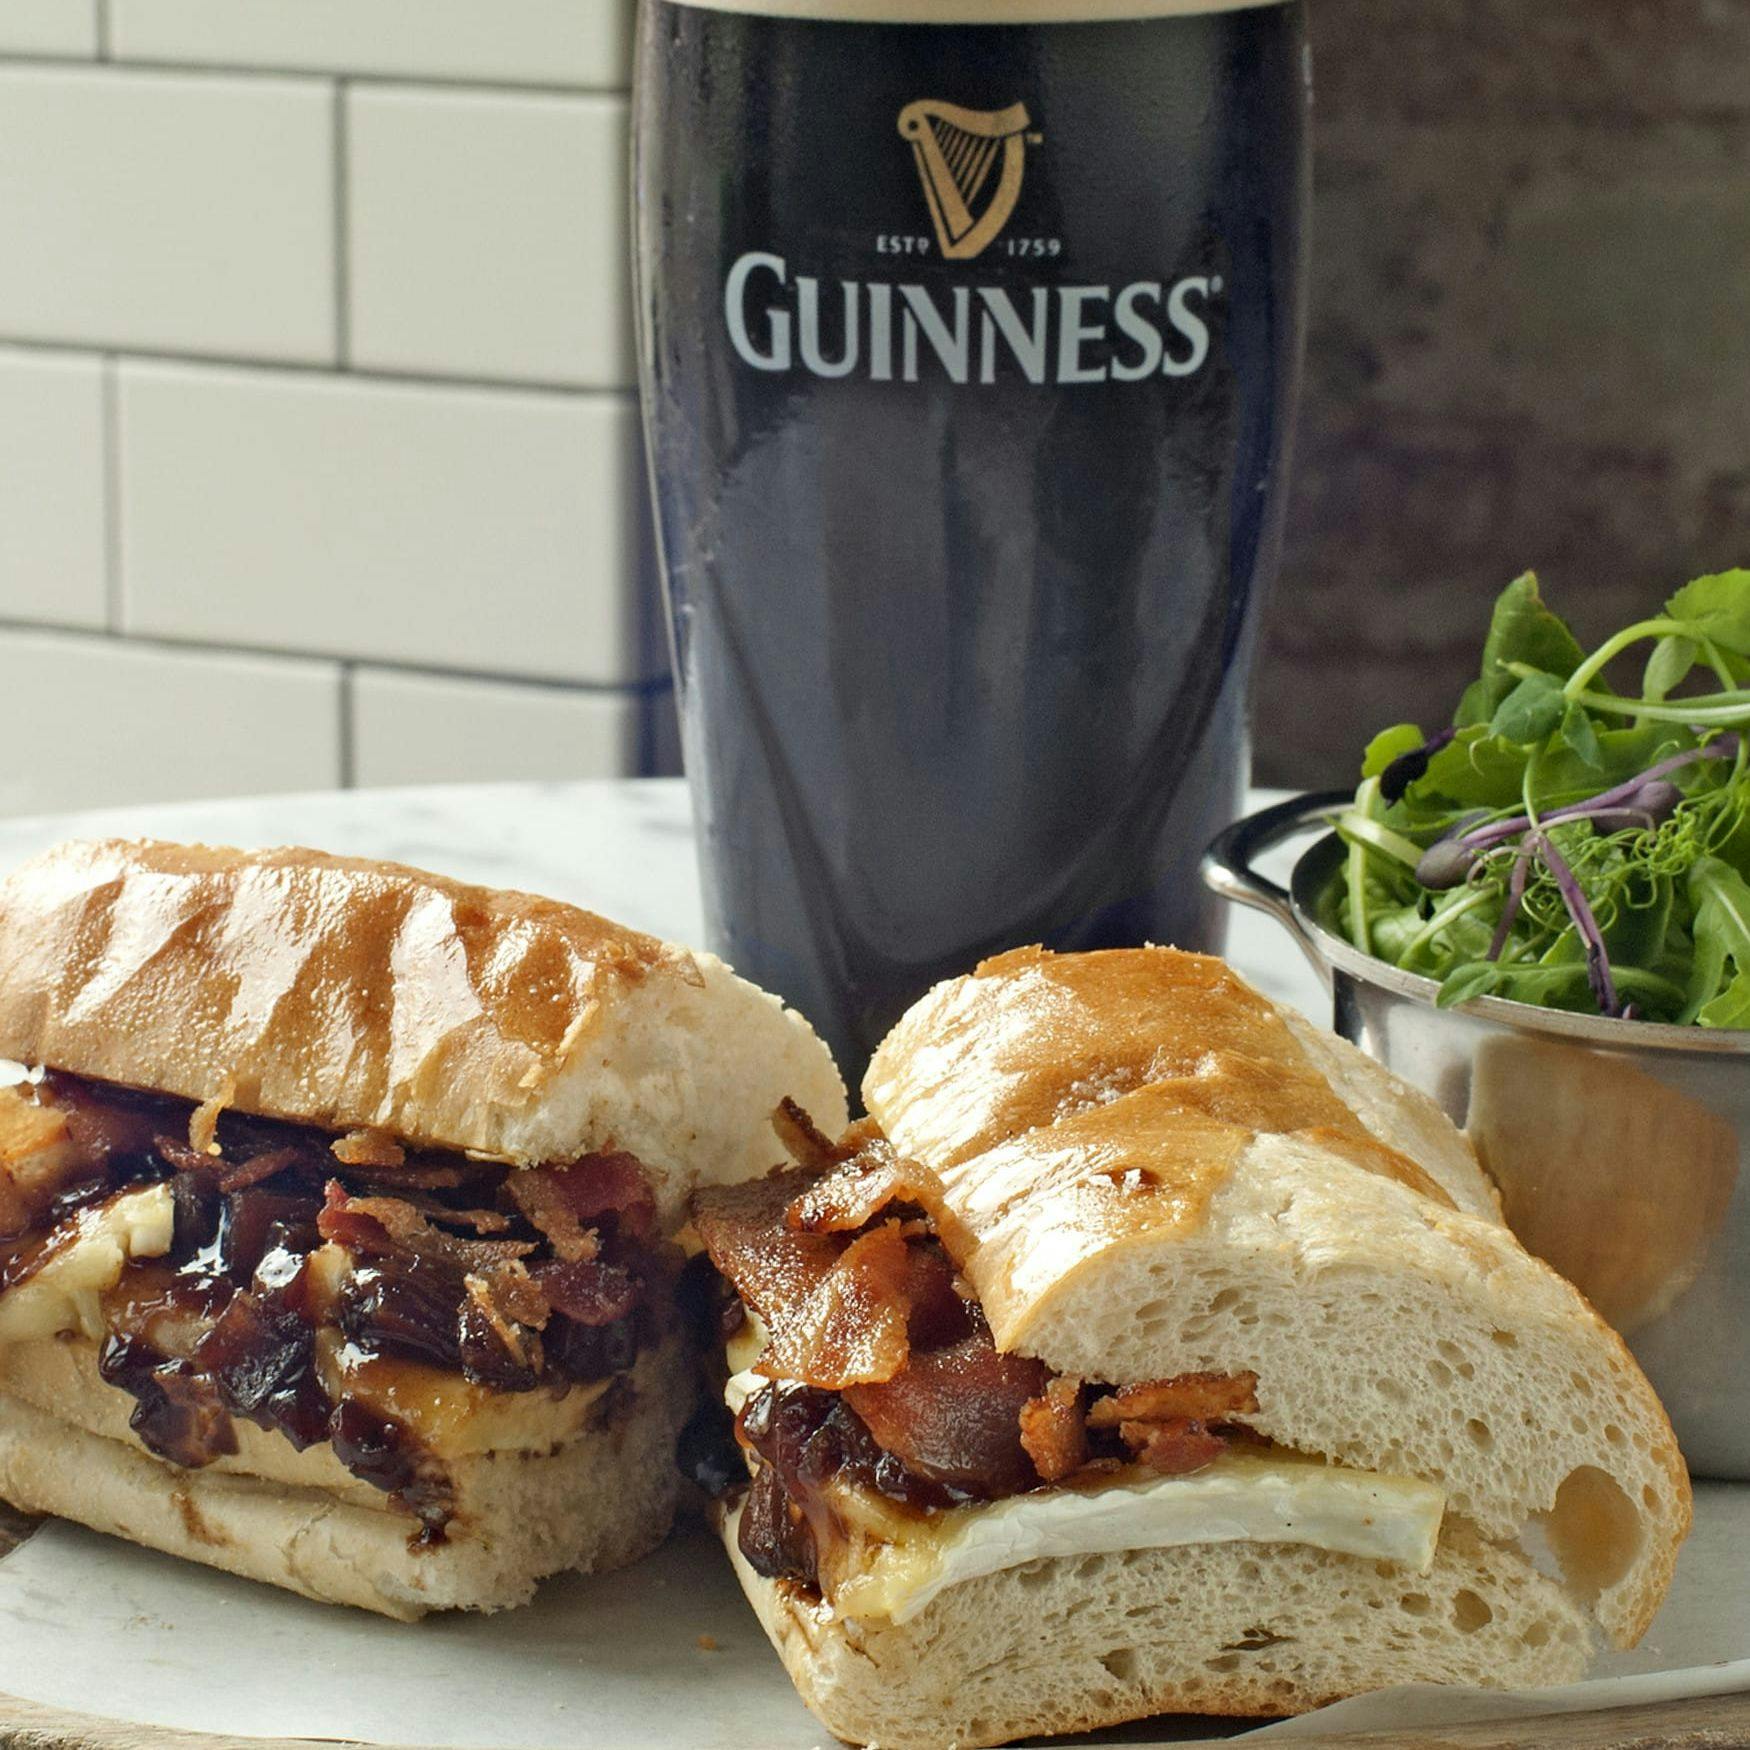 Guinness sandwich with pint of Guinness